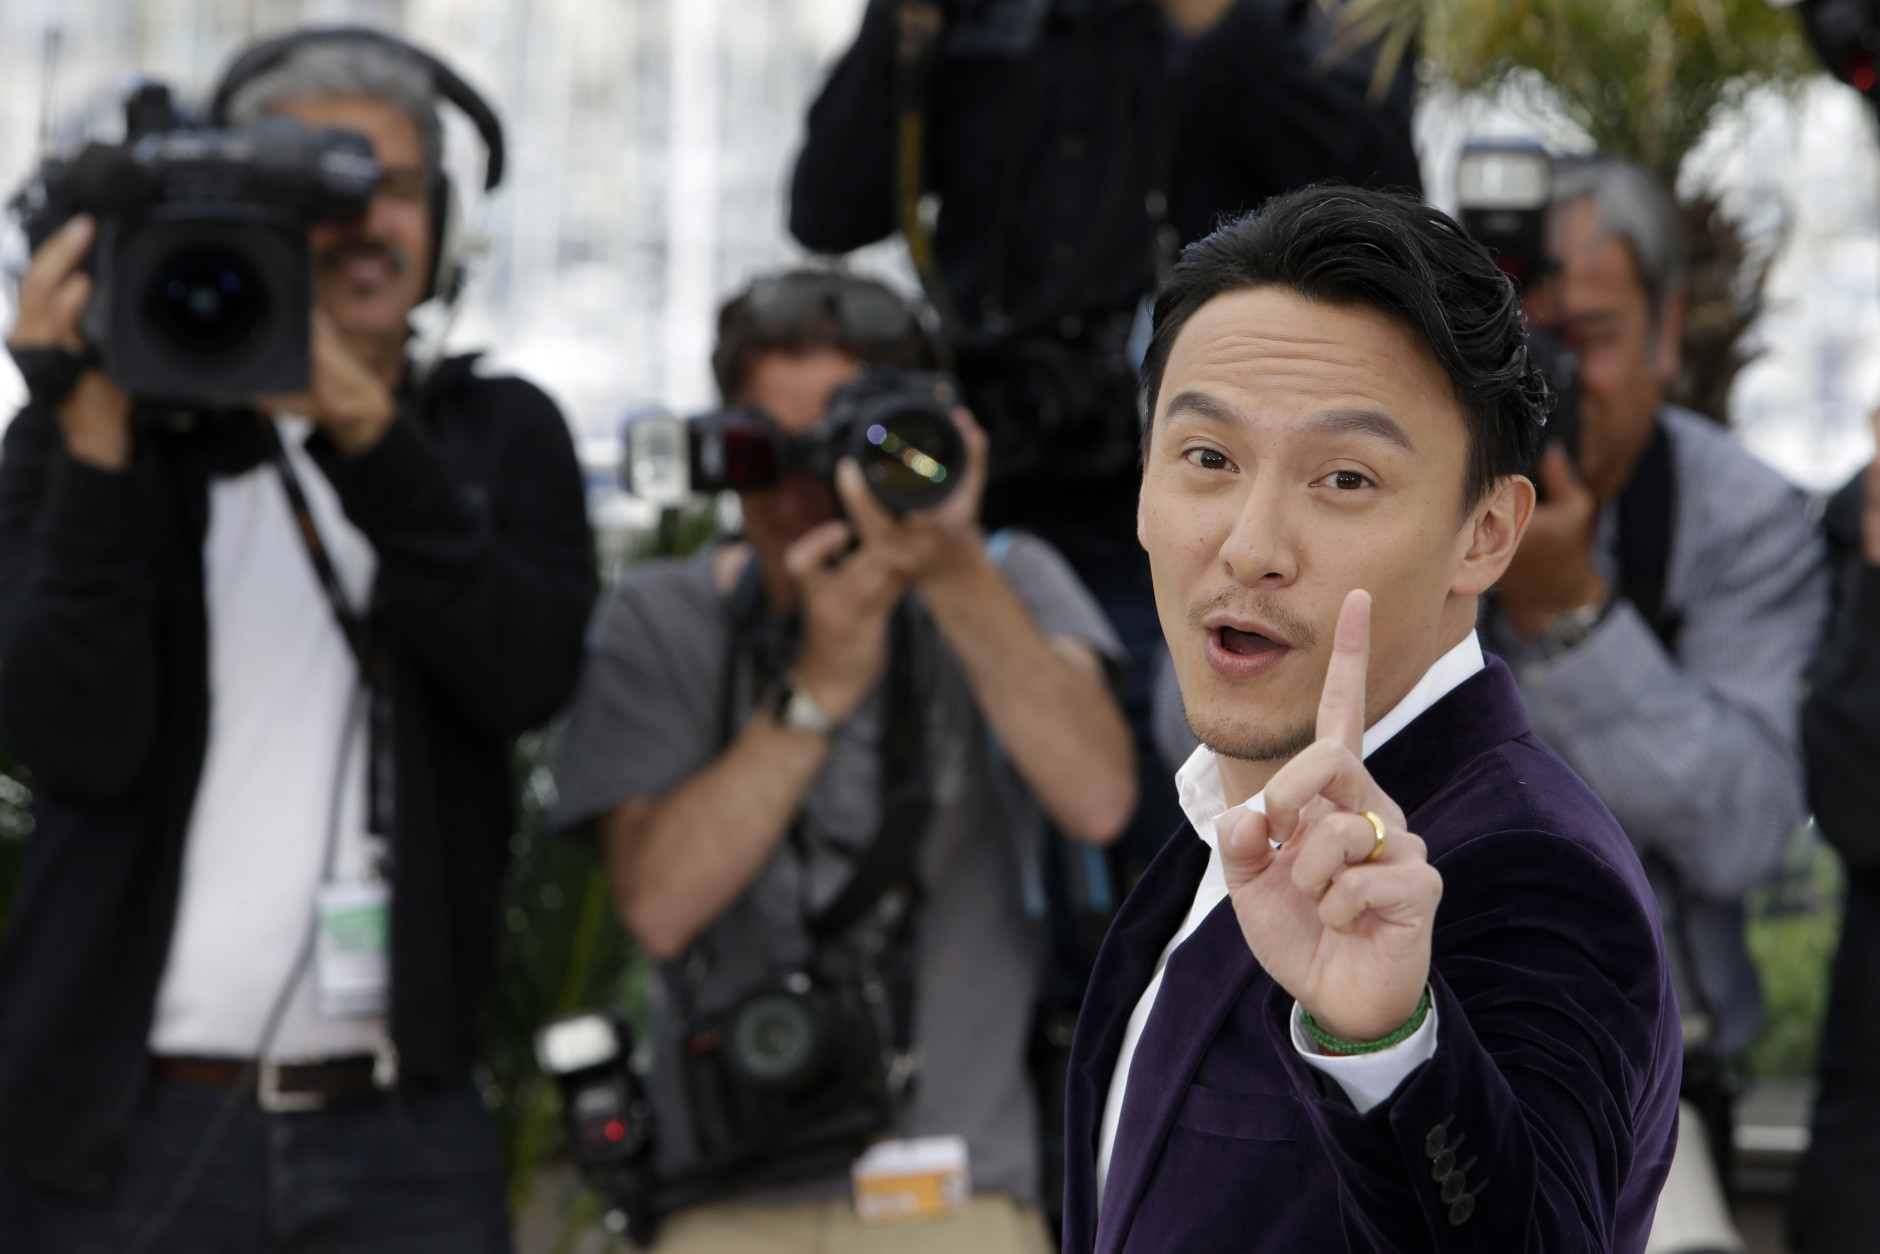 Actor Chang Chen poses for photographers during a photo call for the film Nie Yinniang (The Assassin), at the 68th international film festival, Cannes, southern France, Thursday, May 21, 2015. (AP Photo/Lionel Cironneau)